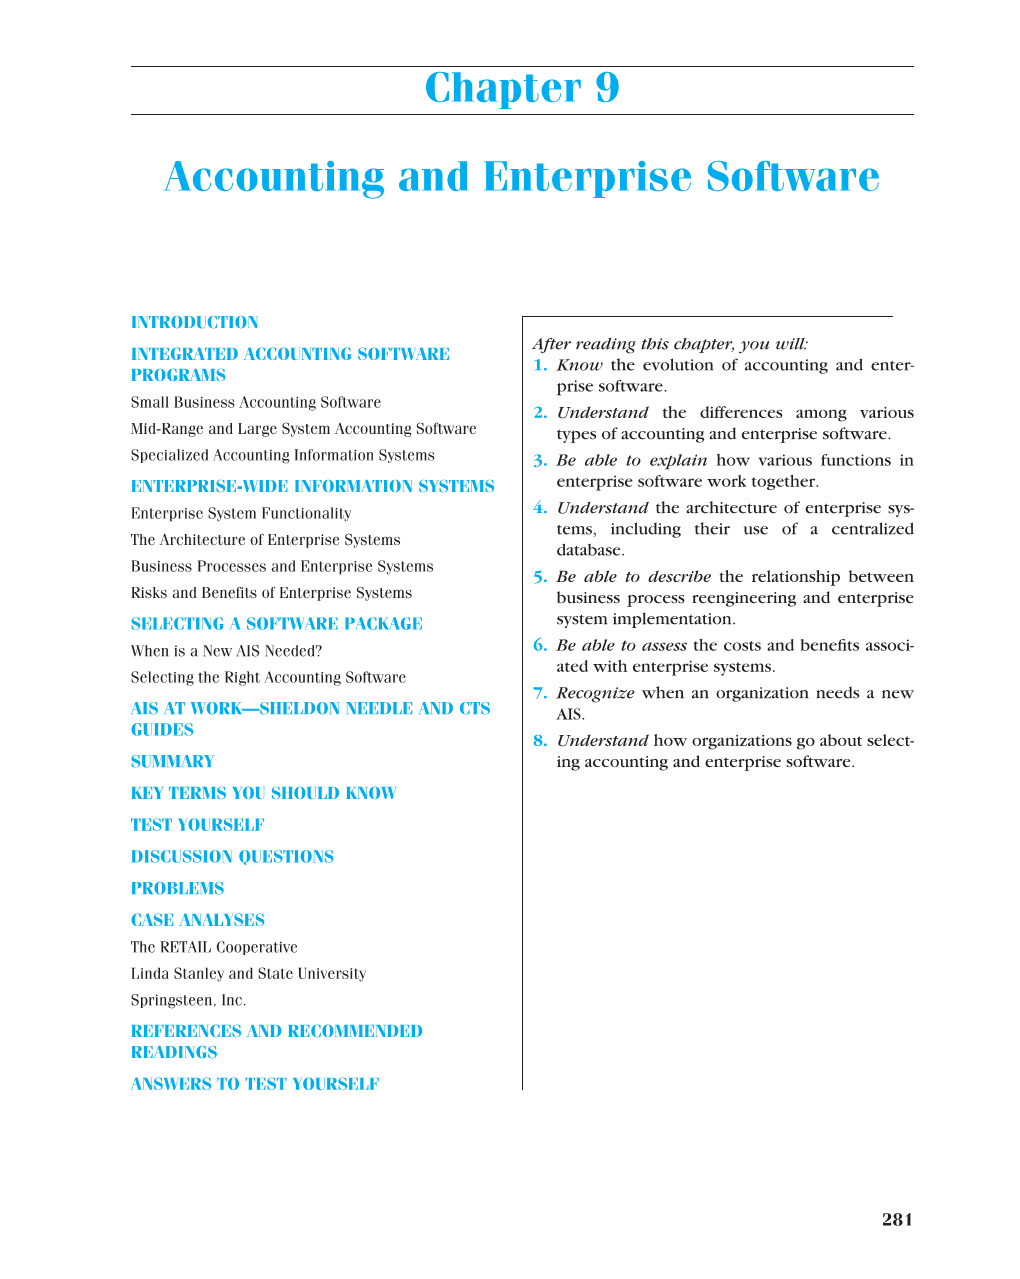 Chapter 9 Accounting and Enterprise Software